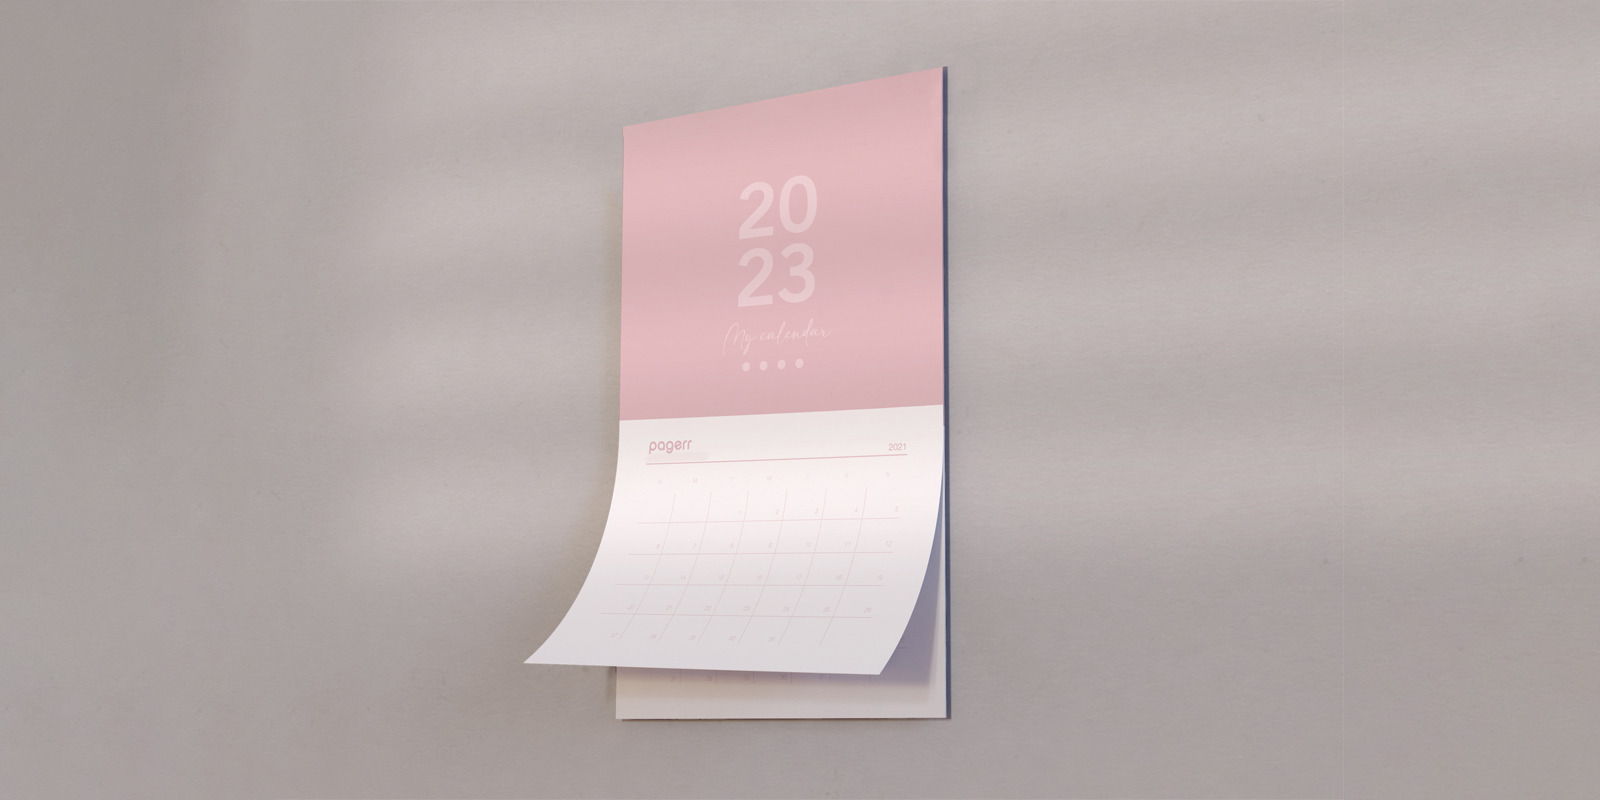 Magnetic calendars in Warsaw - Print with Pagerr